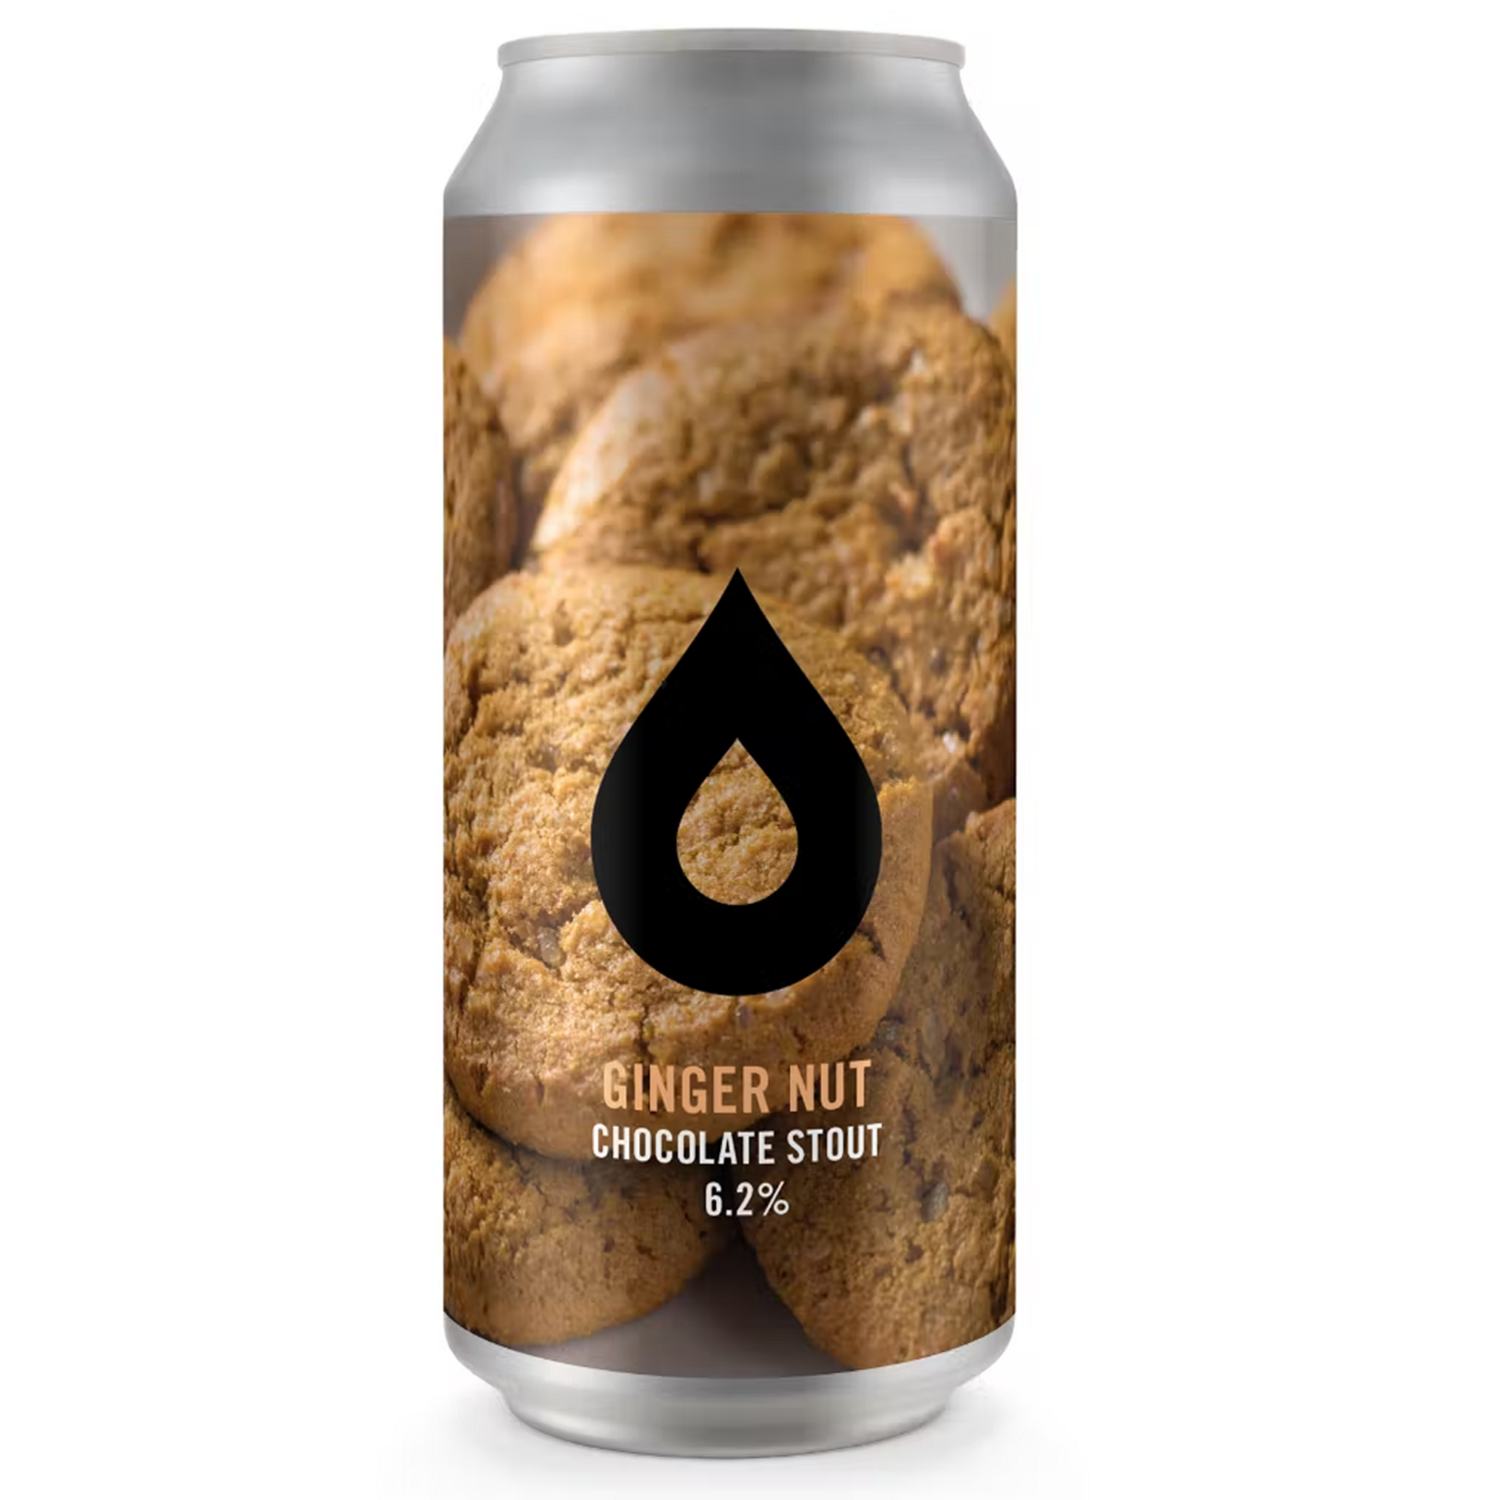 Polly's Ginger Nut Chocolate Stout